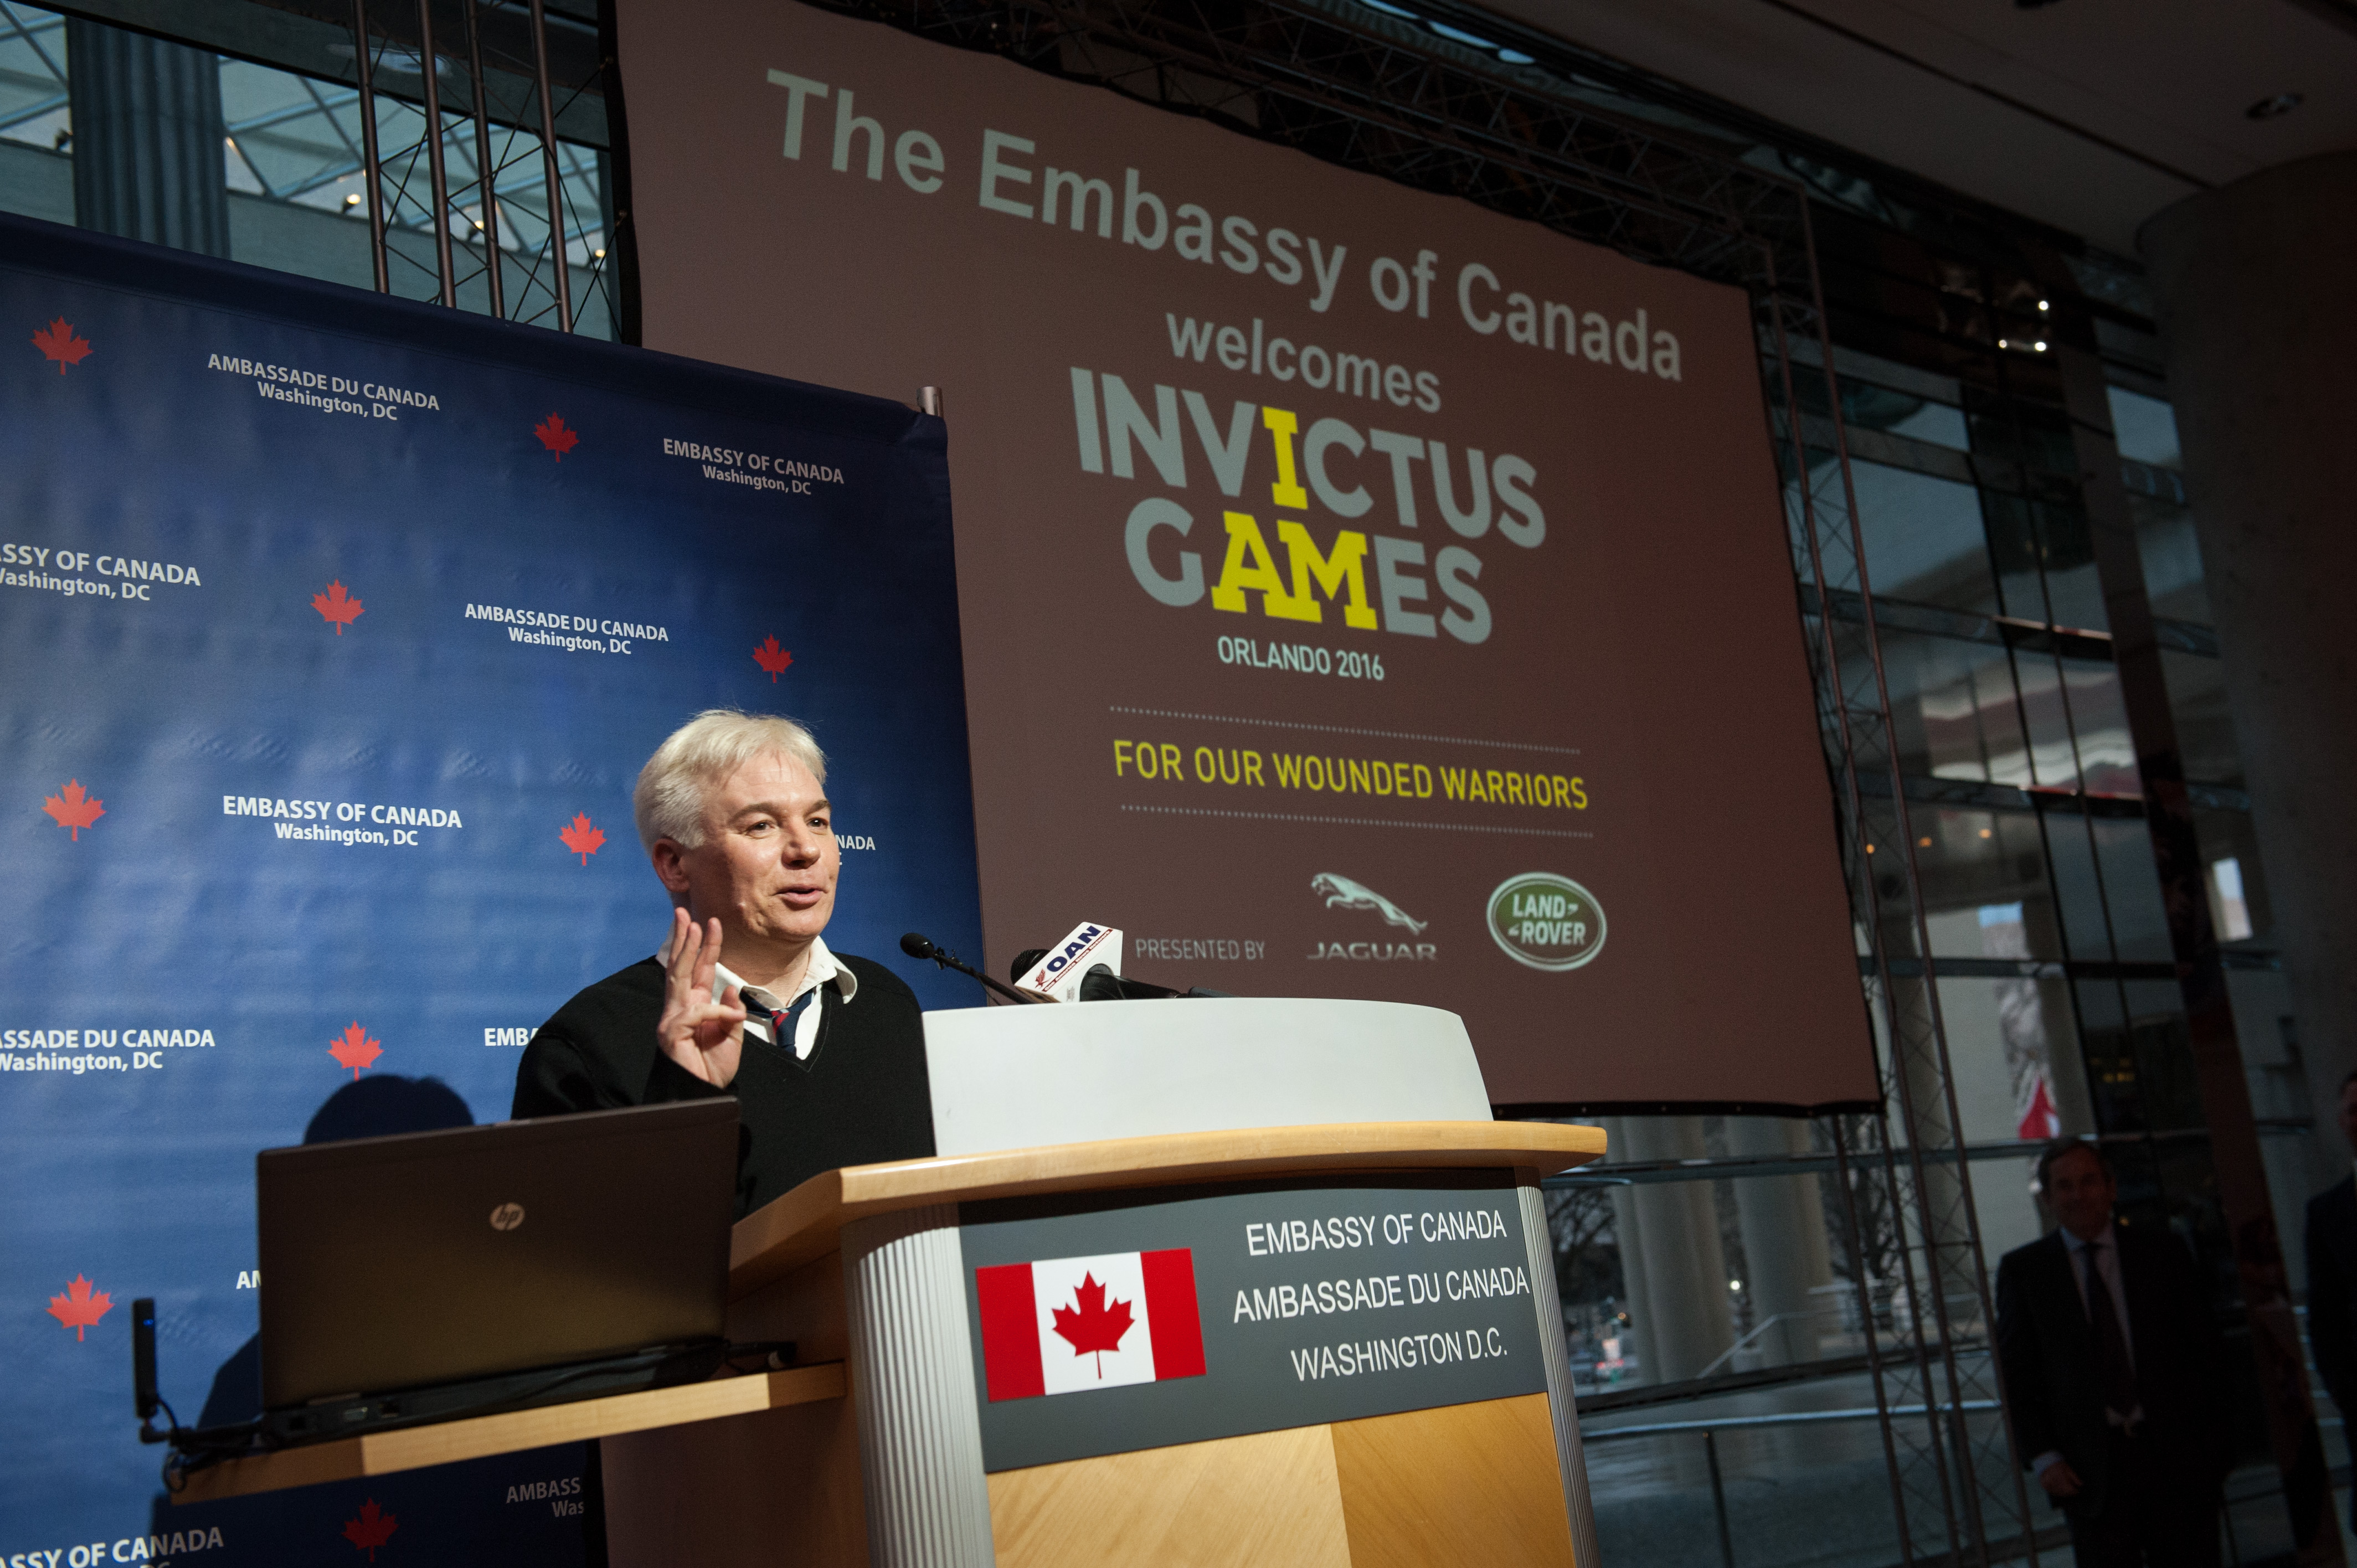 Mike Myers supporter of Invictus Games